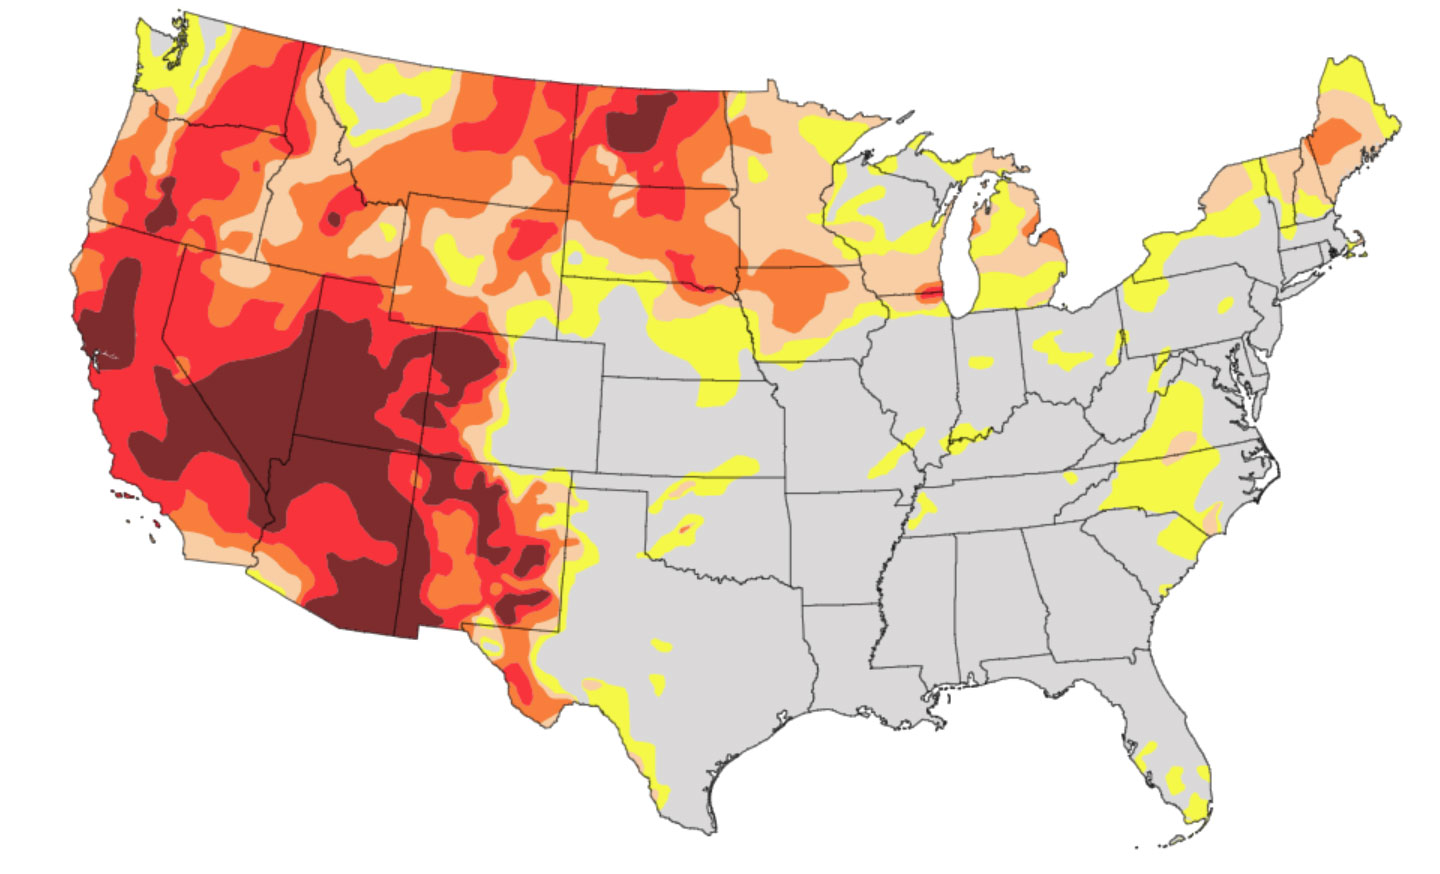 Drought severity in the west